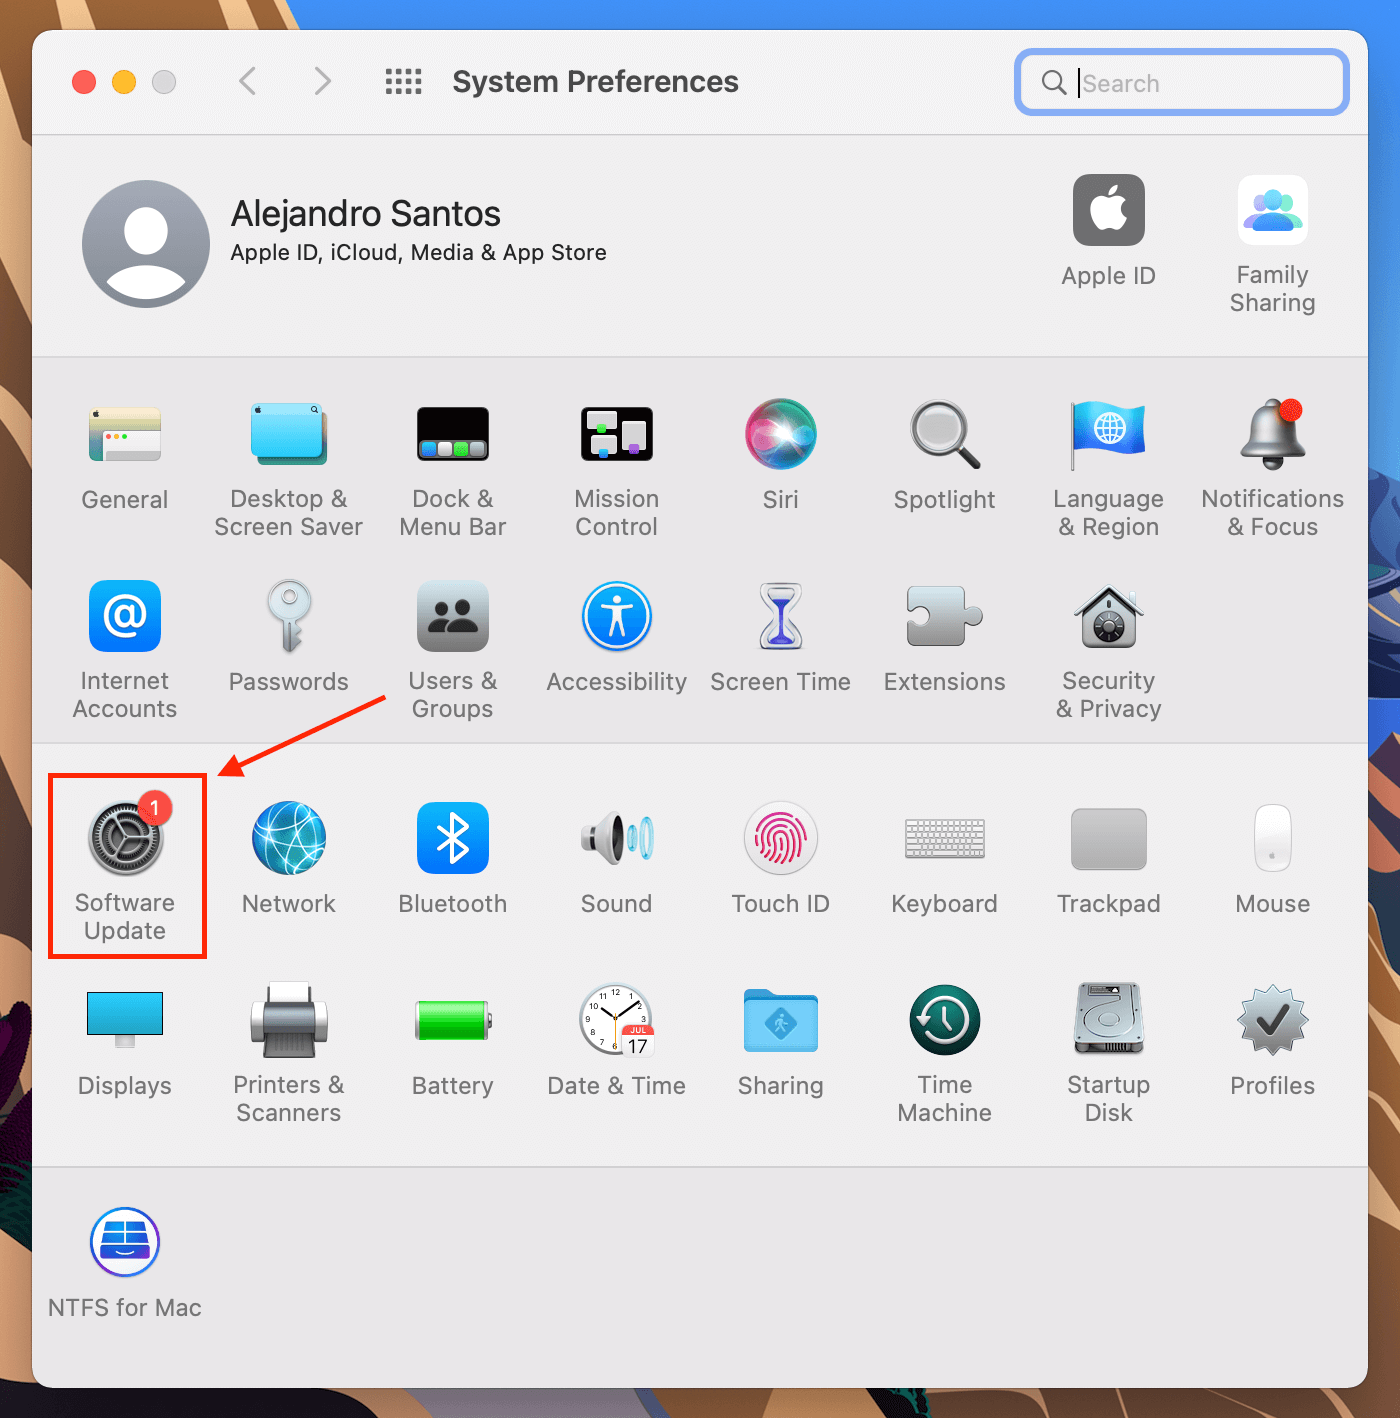 Software Update app in the System Preferences window